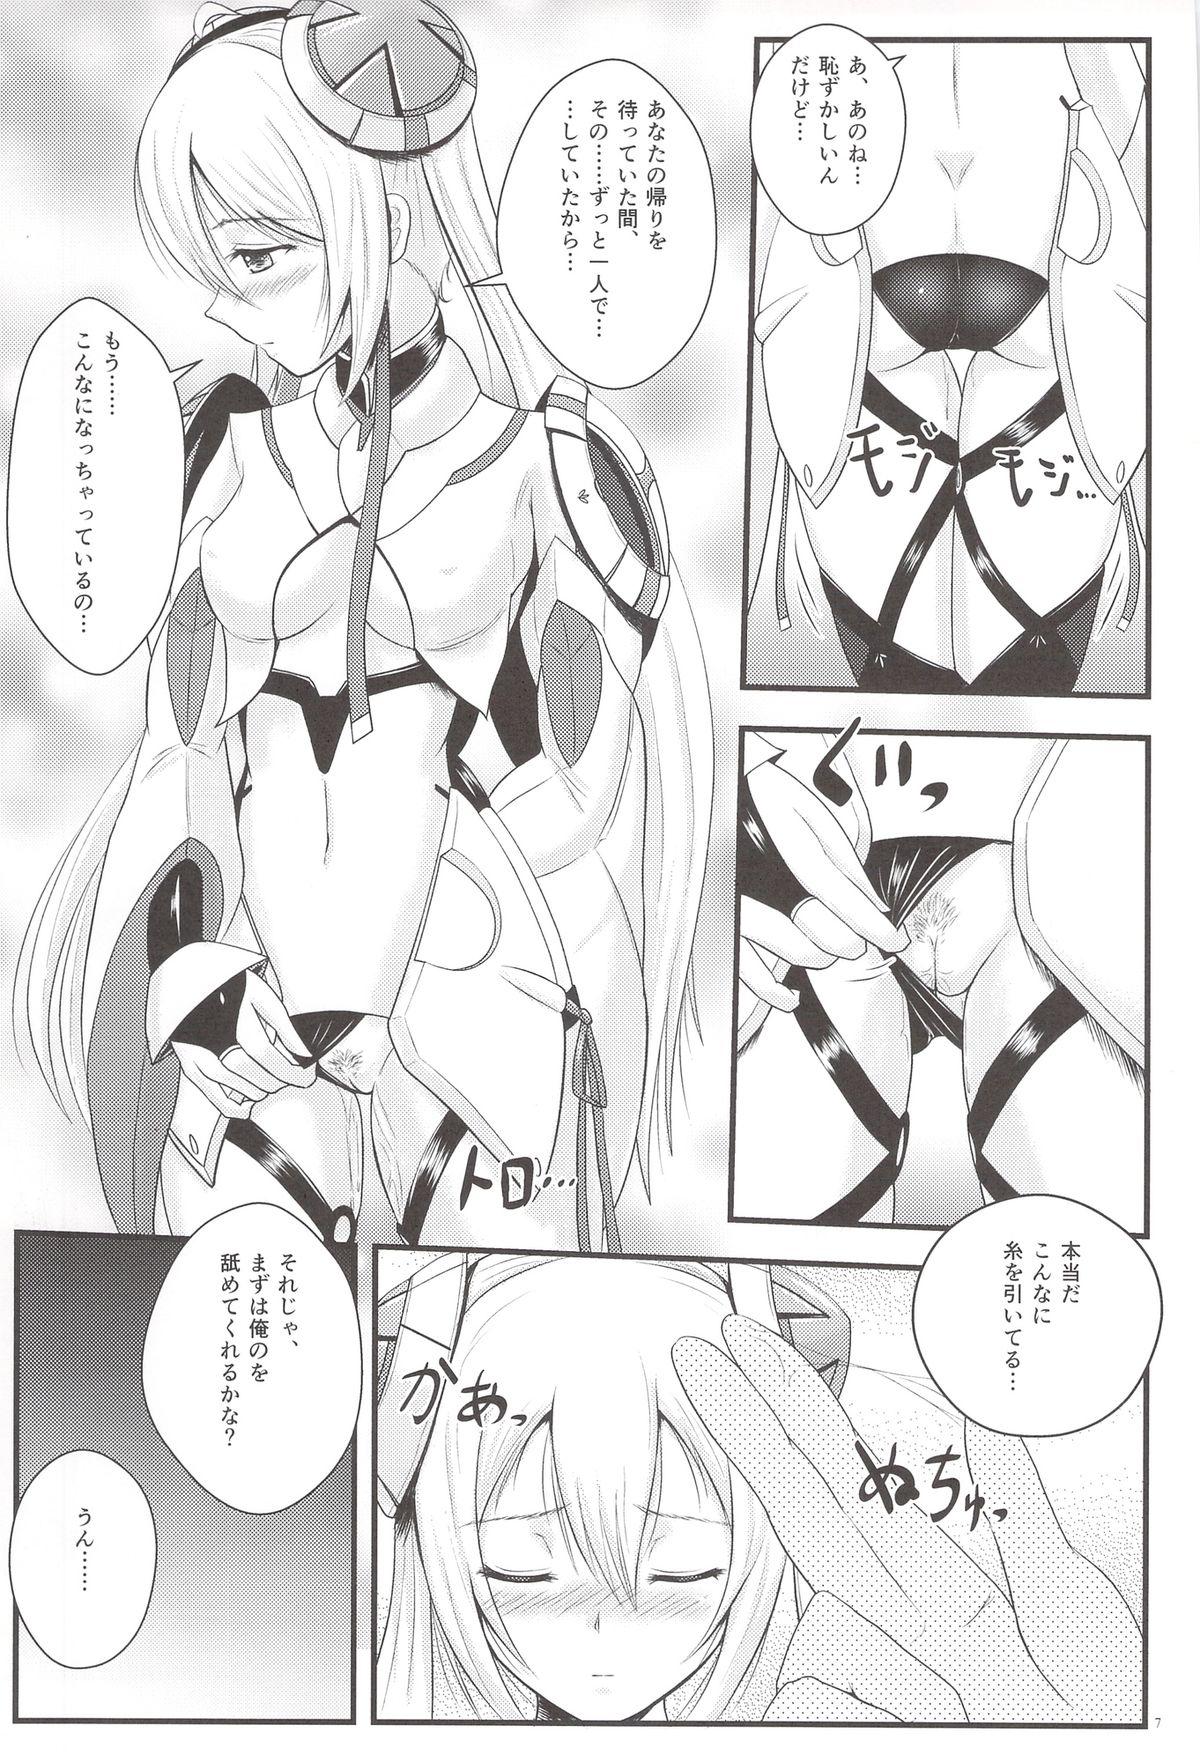 Rough Sex When I think of you - Phantasy star online 2 Cocksucking - Page 6